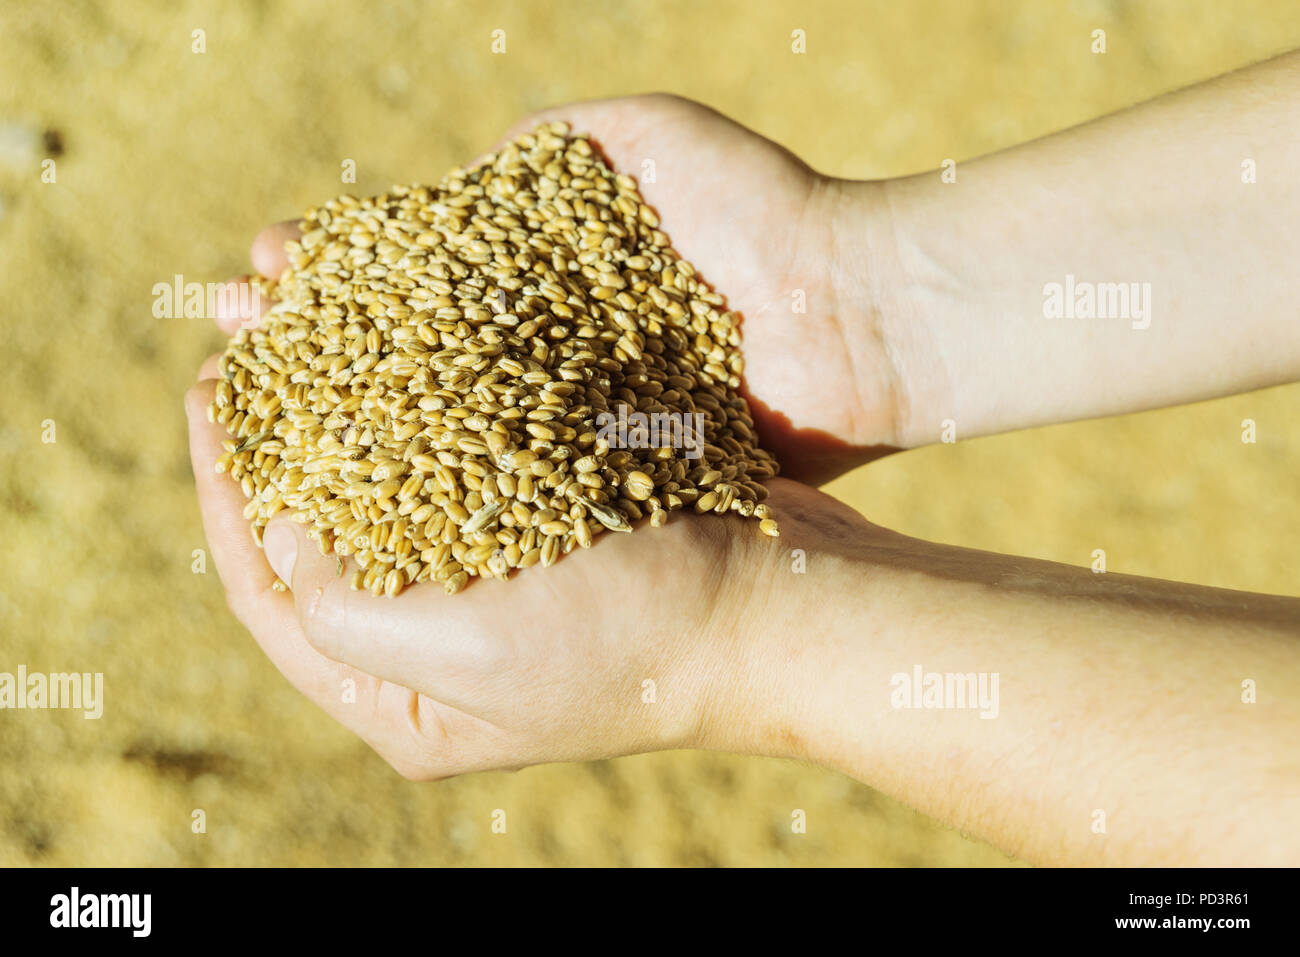 Men's hands holding a heap of of ripe wheat grains against the background of spilled grains Stock Photo